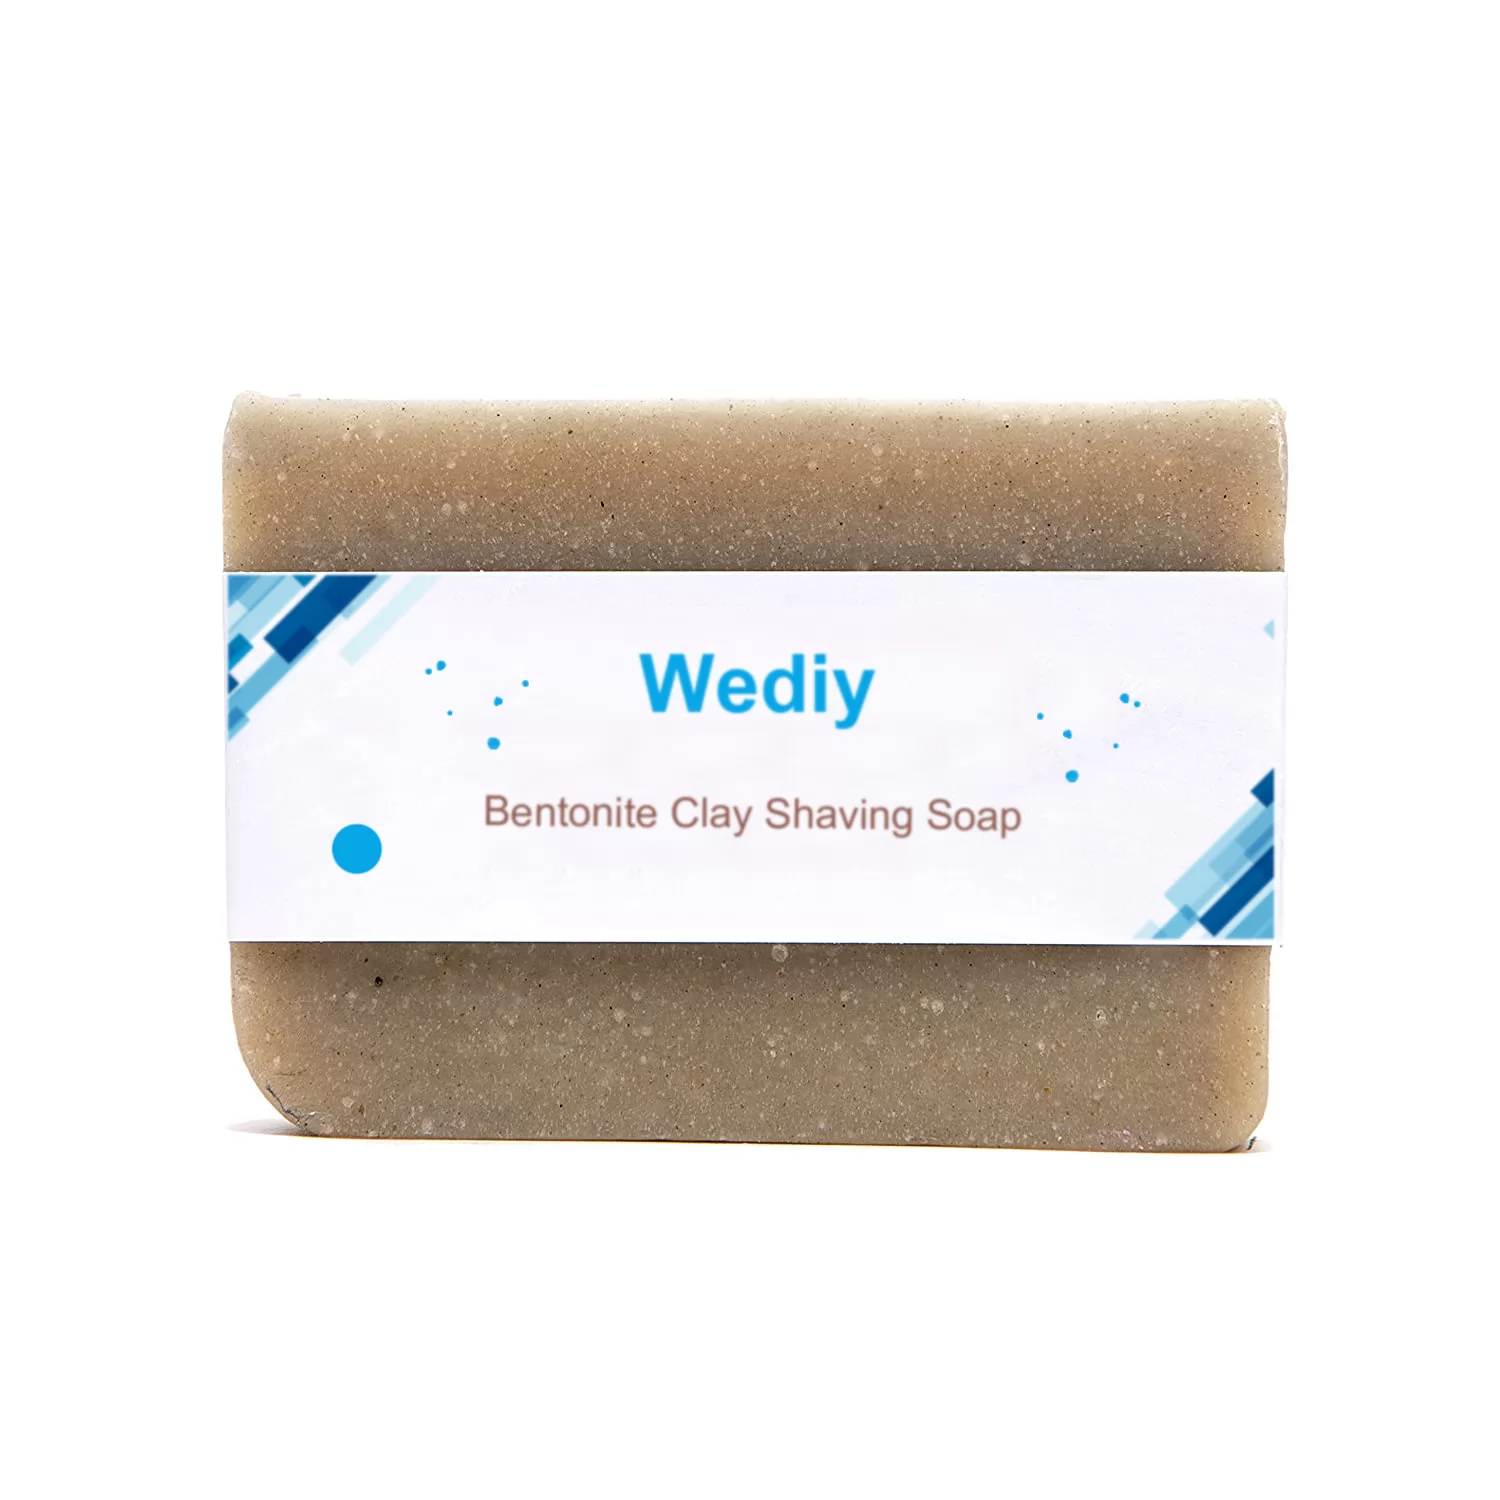 Wediy Bentonite Clay Shaving Soap | Specially Formulated for A Clean Shave - All Natural Ingredients for Perfectly Clean Skin (Bentonite Clay Shaving）